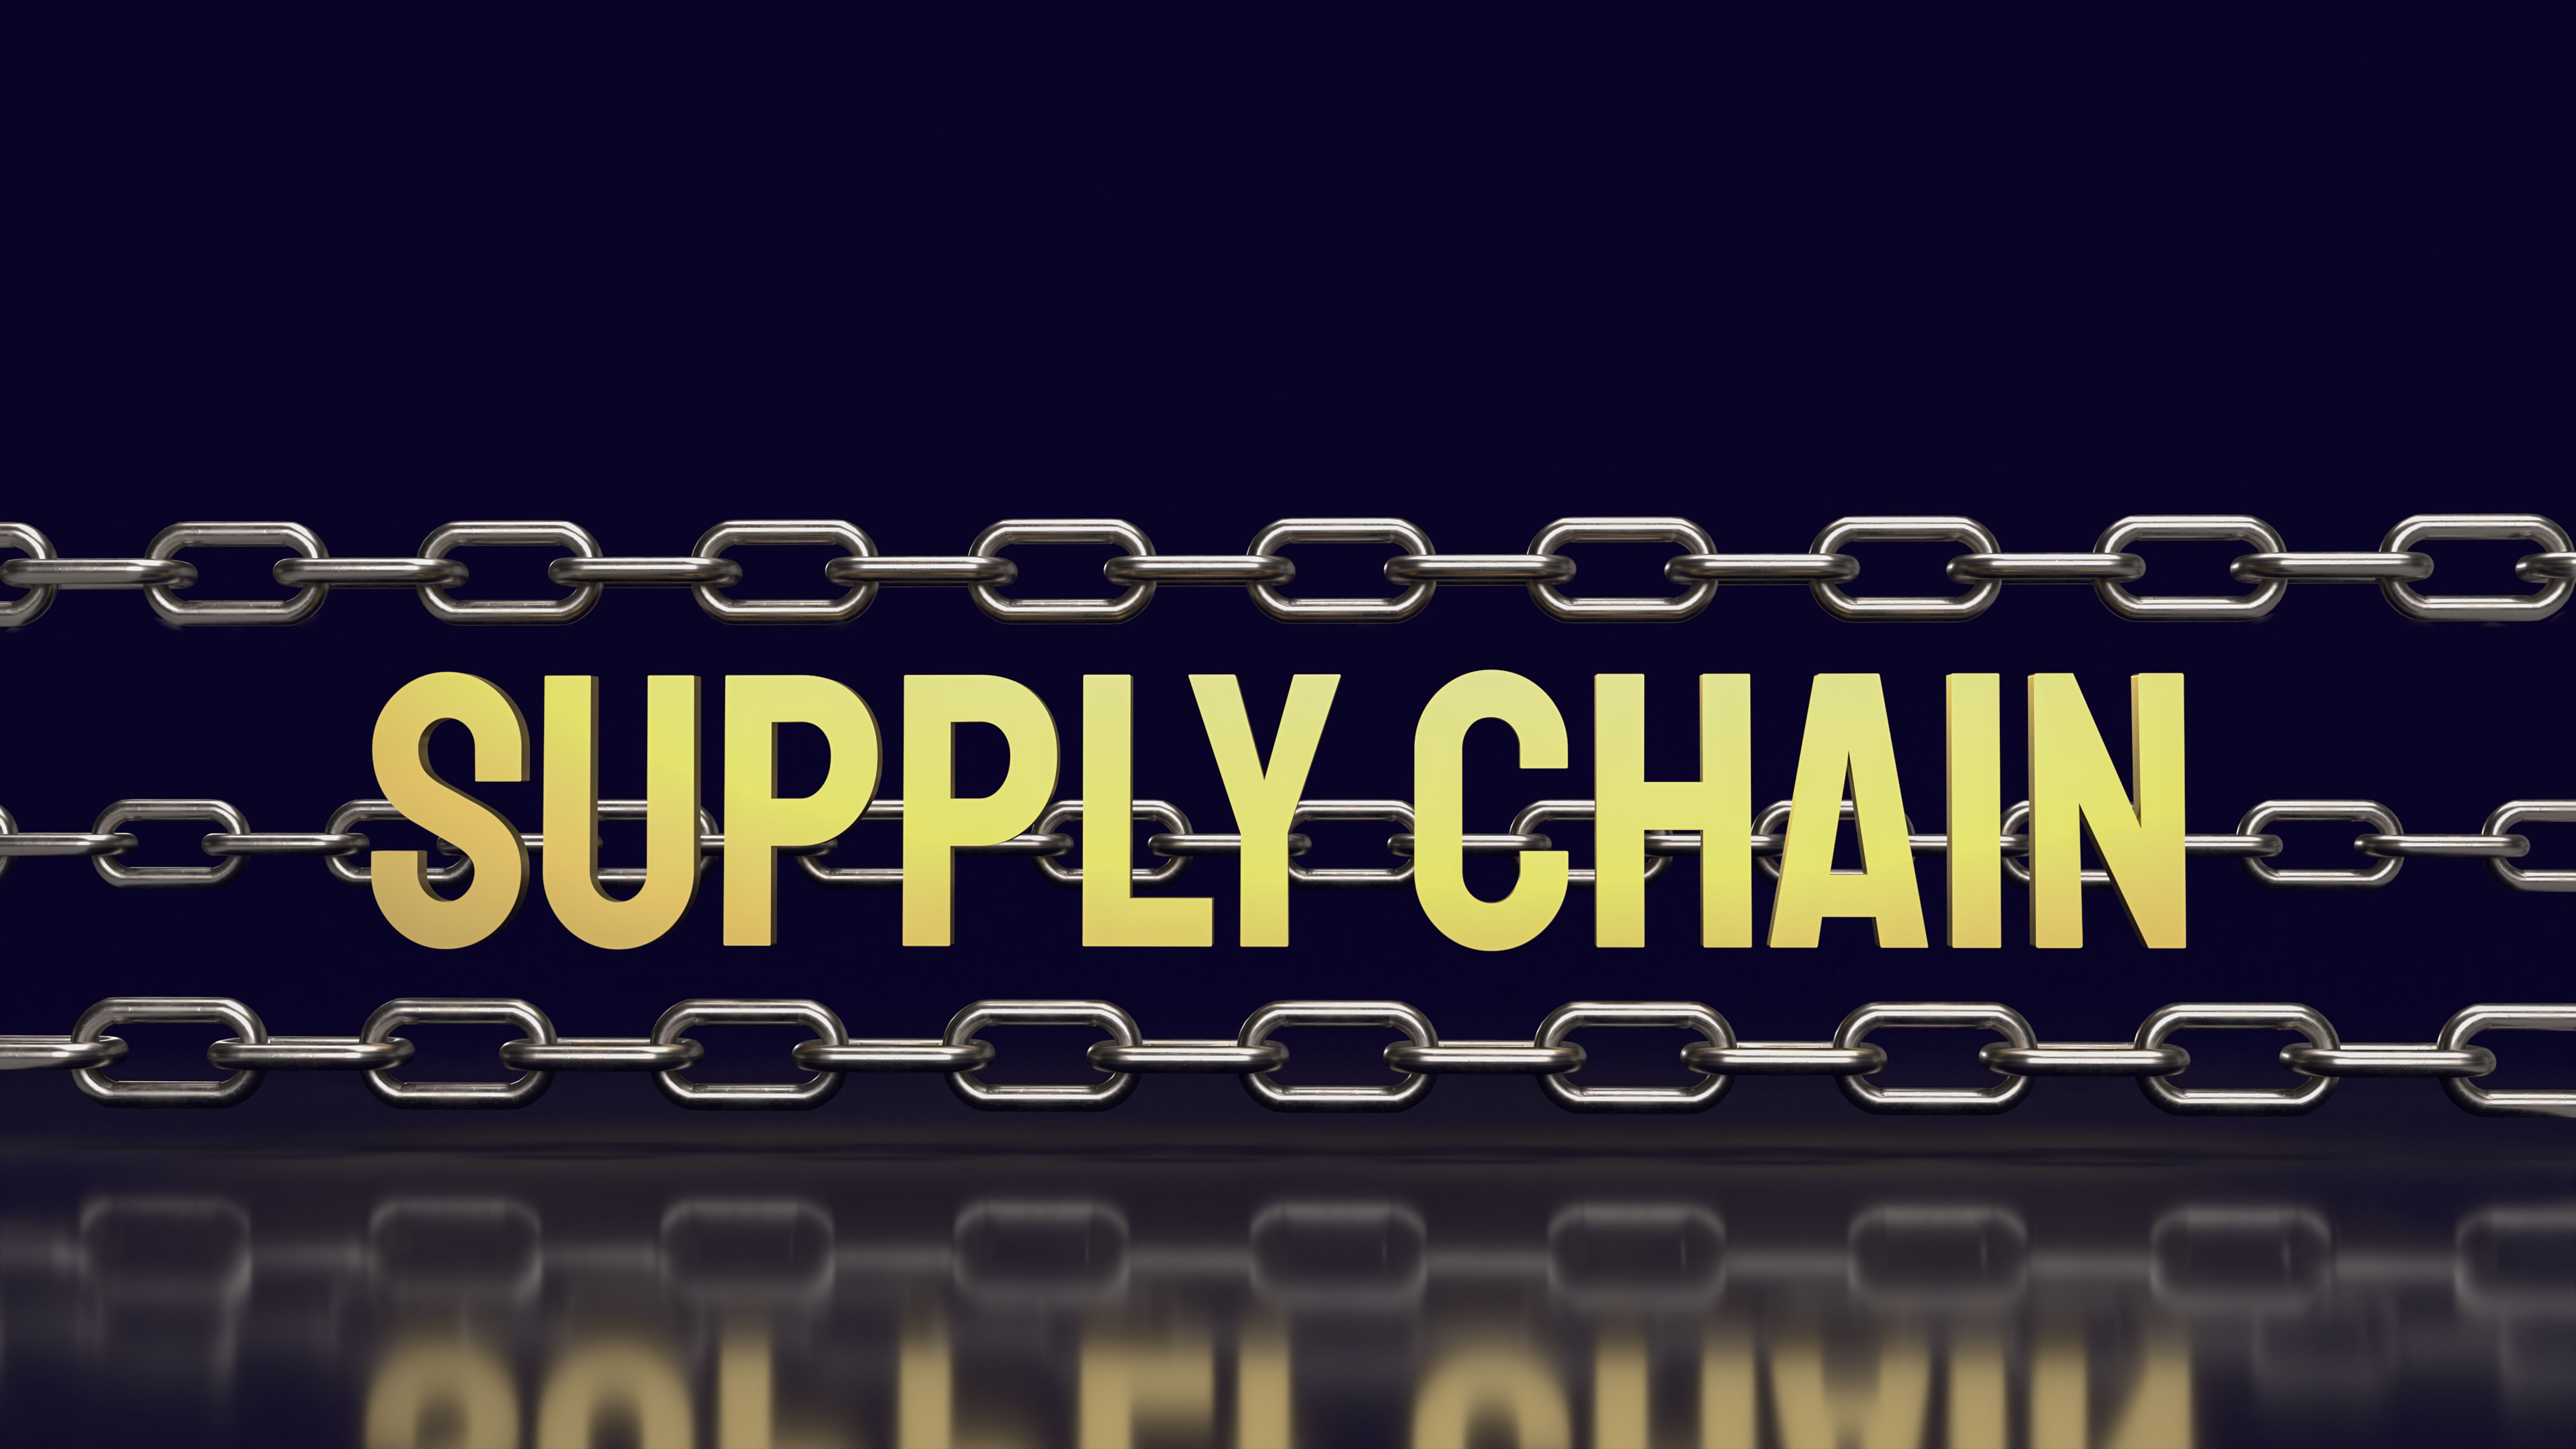 metal-chain-gold-text-supply-chain-business-abstract-background-concept-3d-rendering.jpg